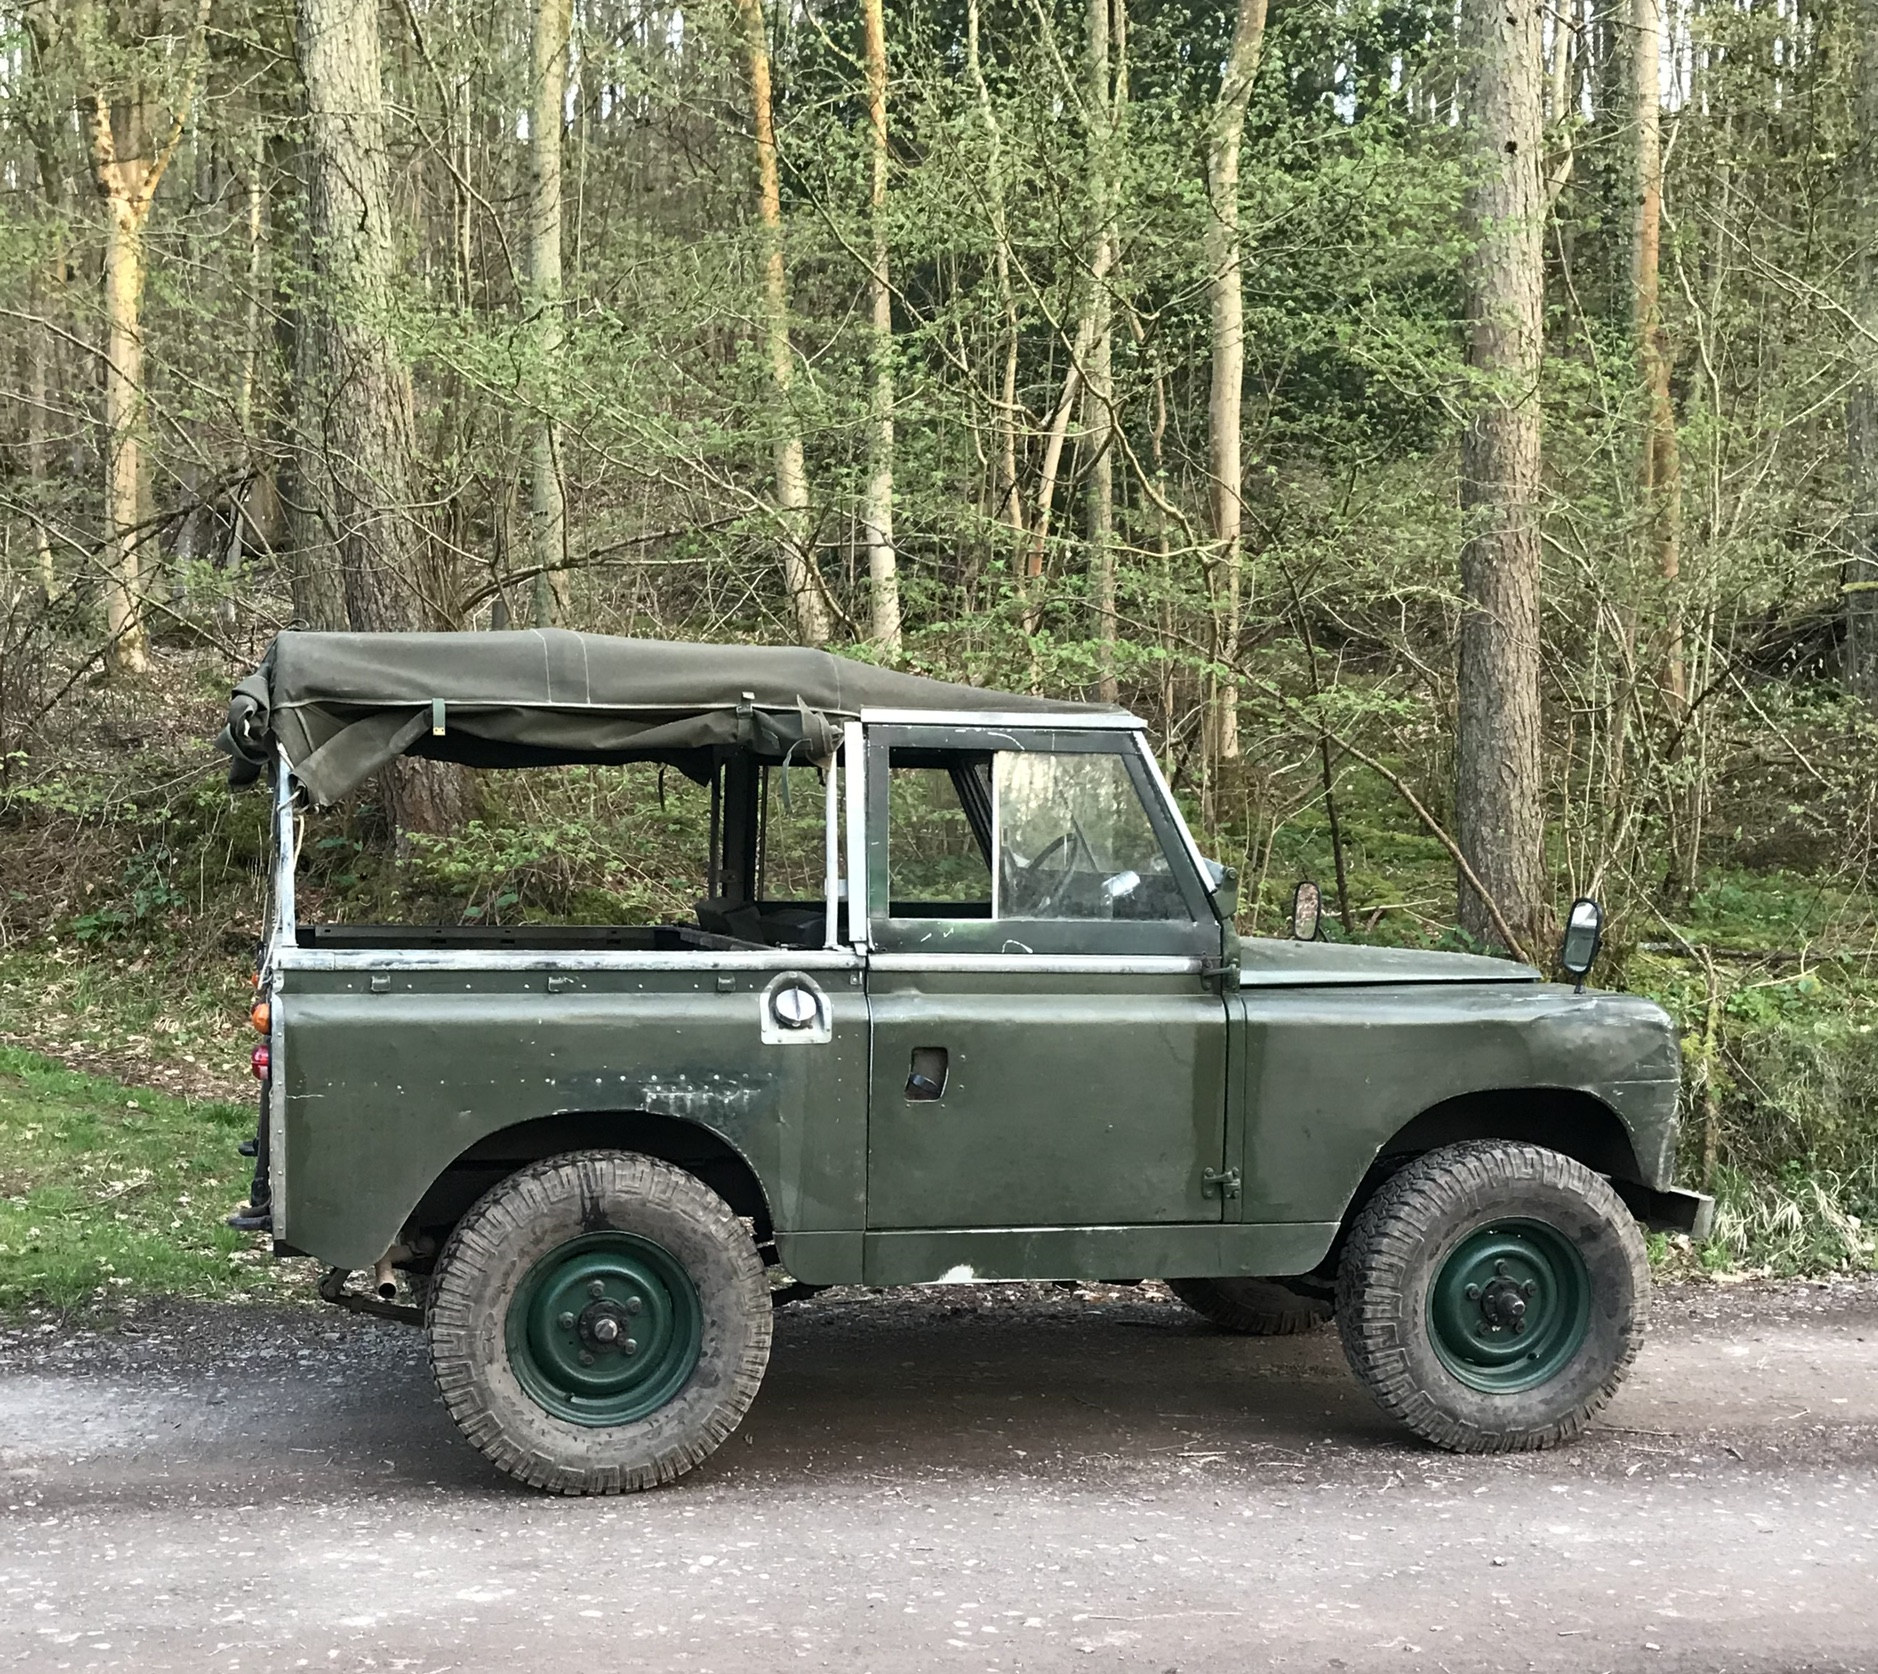 An old truck is parked in a field - Pistonheads